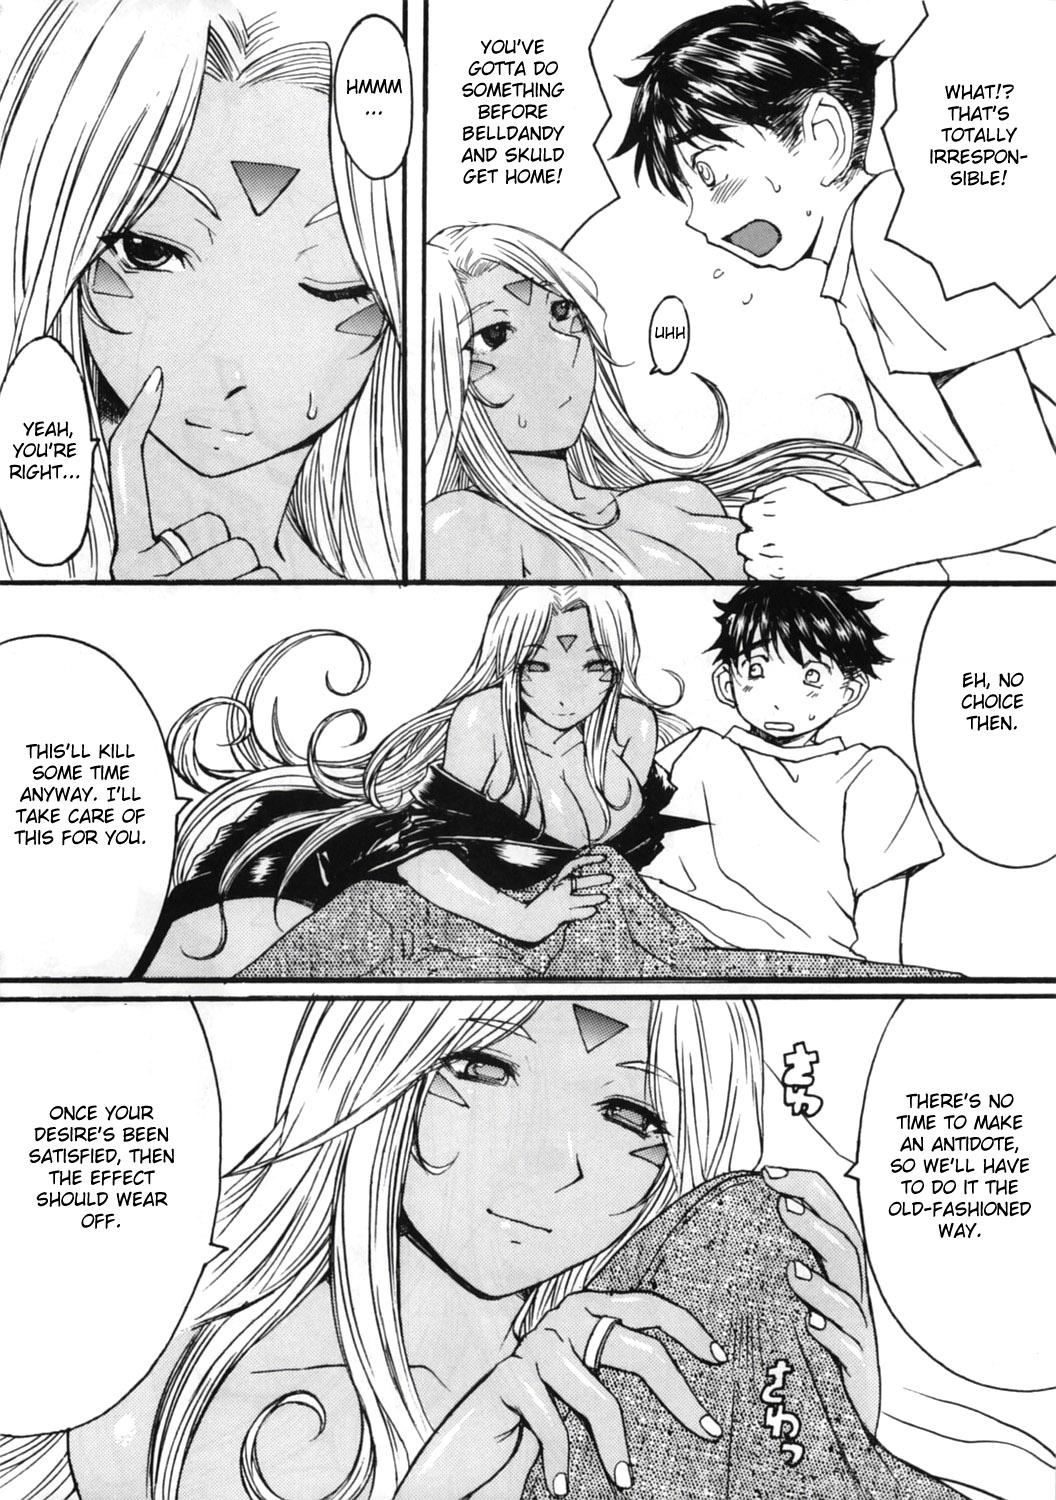 Soloboy Ano Subarashii Ane wo Mou Ichido | One More Time With the Beautiful Sister - Ah my goddess Chica - Page 9